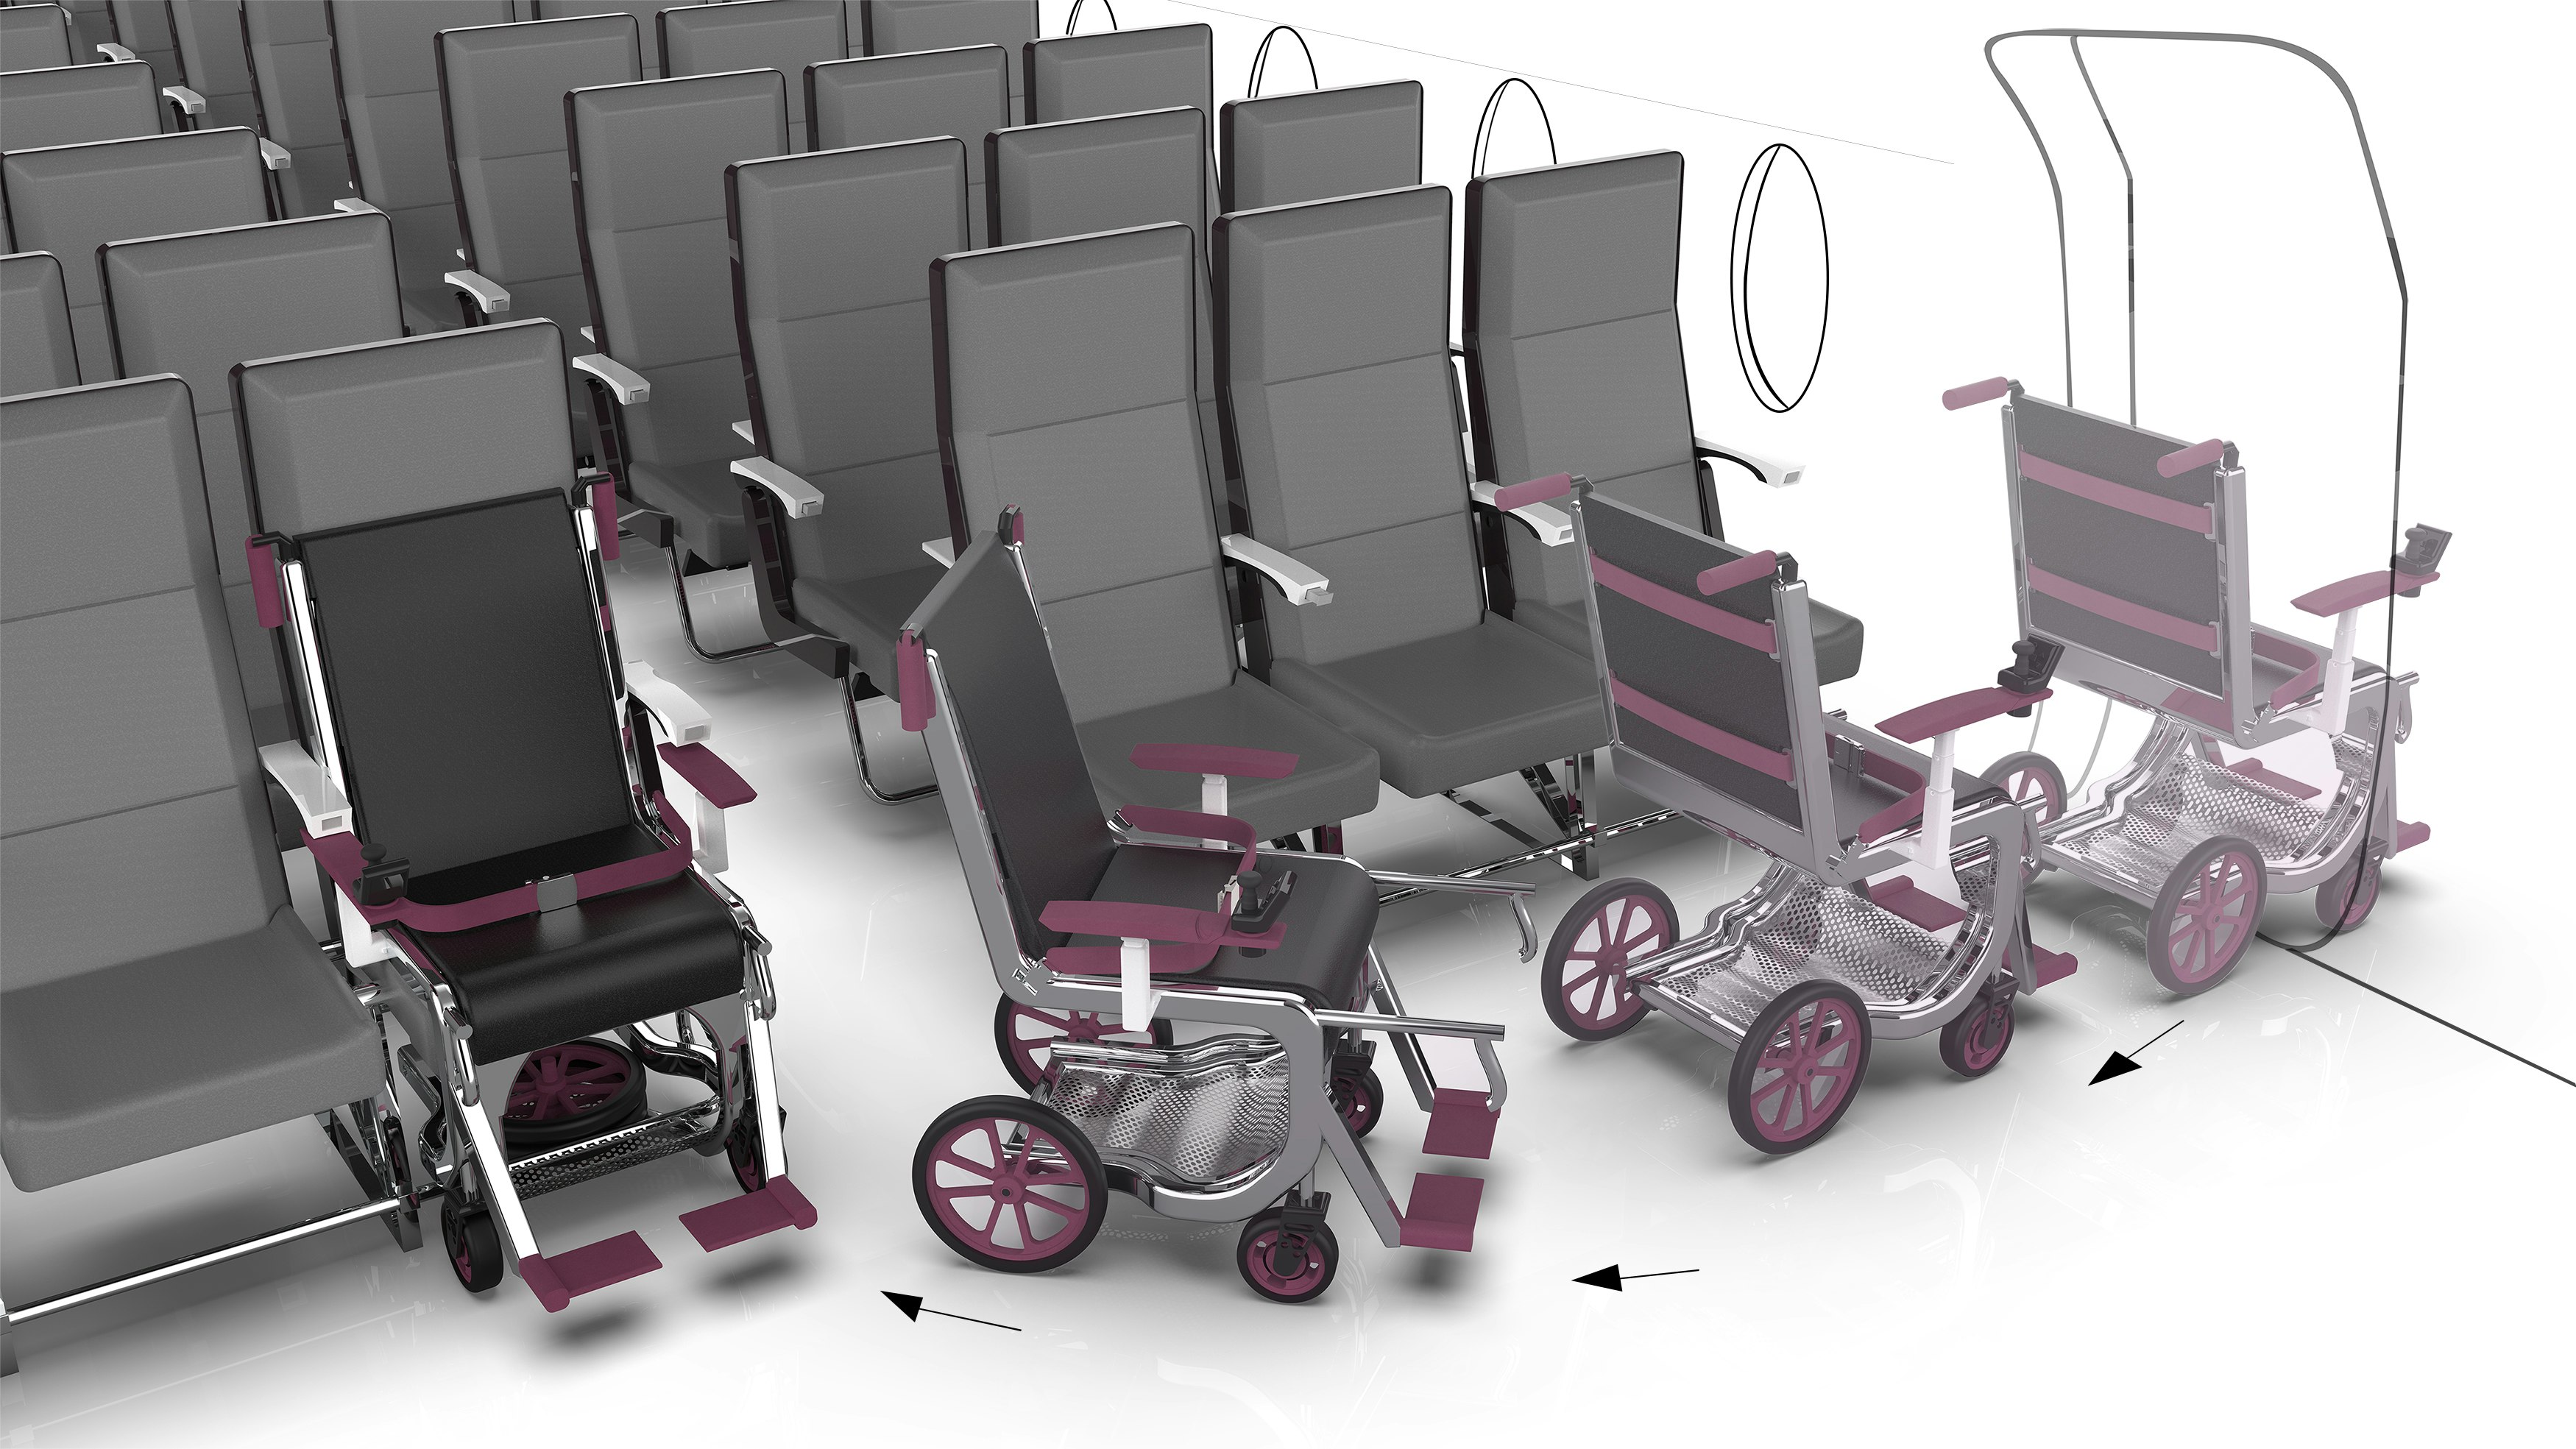 A diagram showing an aircraft cabin with a wheelchair in the row of seats, then in the aisle, then rolling out the door